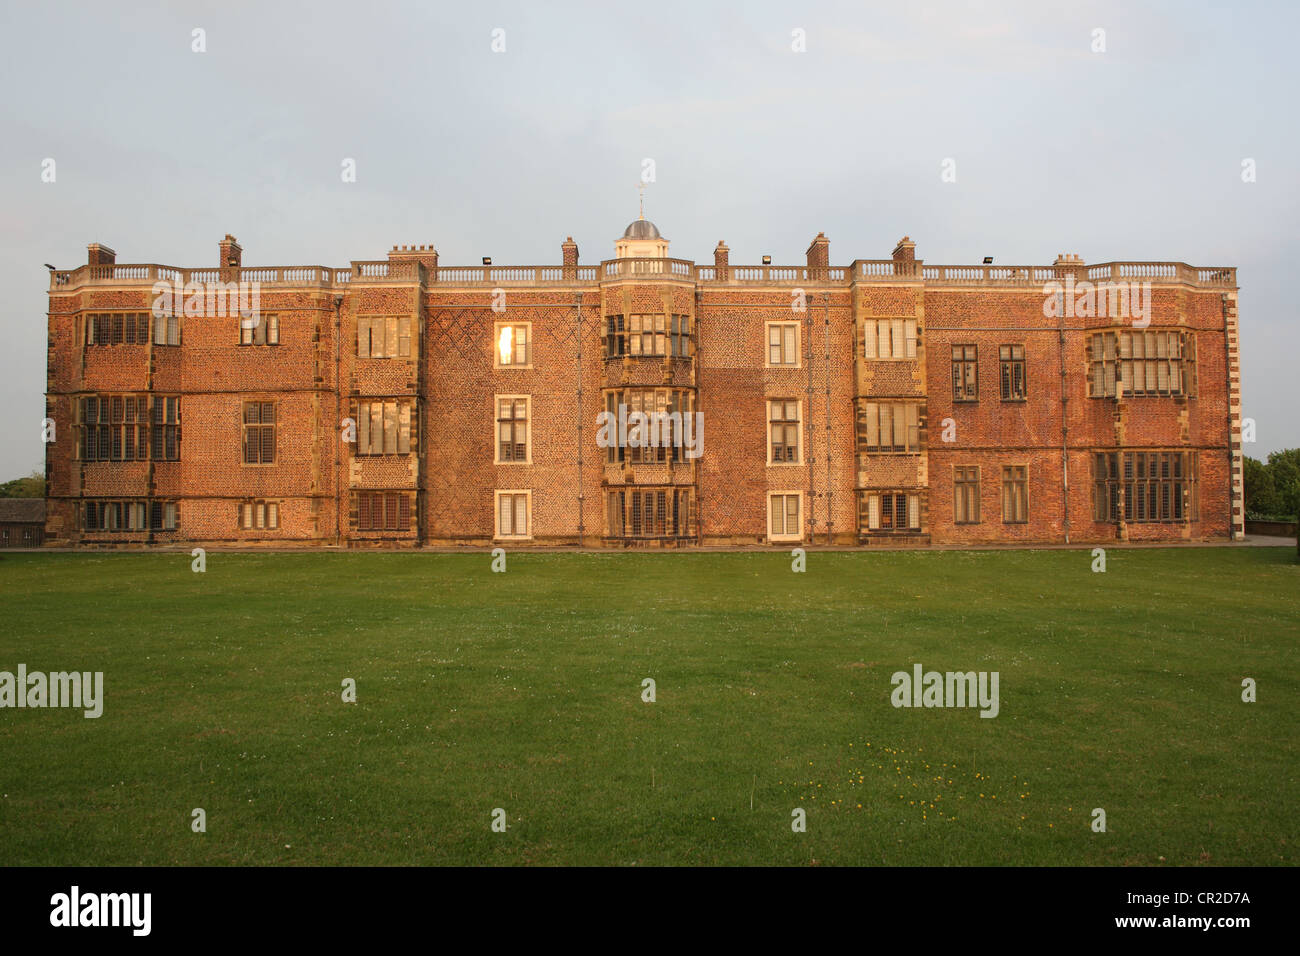 Temple Newsam is a Tudor-Jacobean house with grounds landscaped by Capability Brown, in Leeds, West Yorkshire, England. Stock Photo